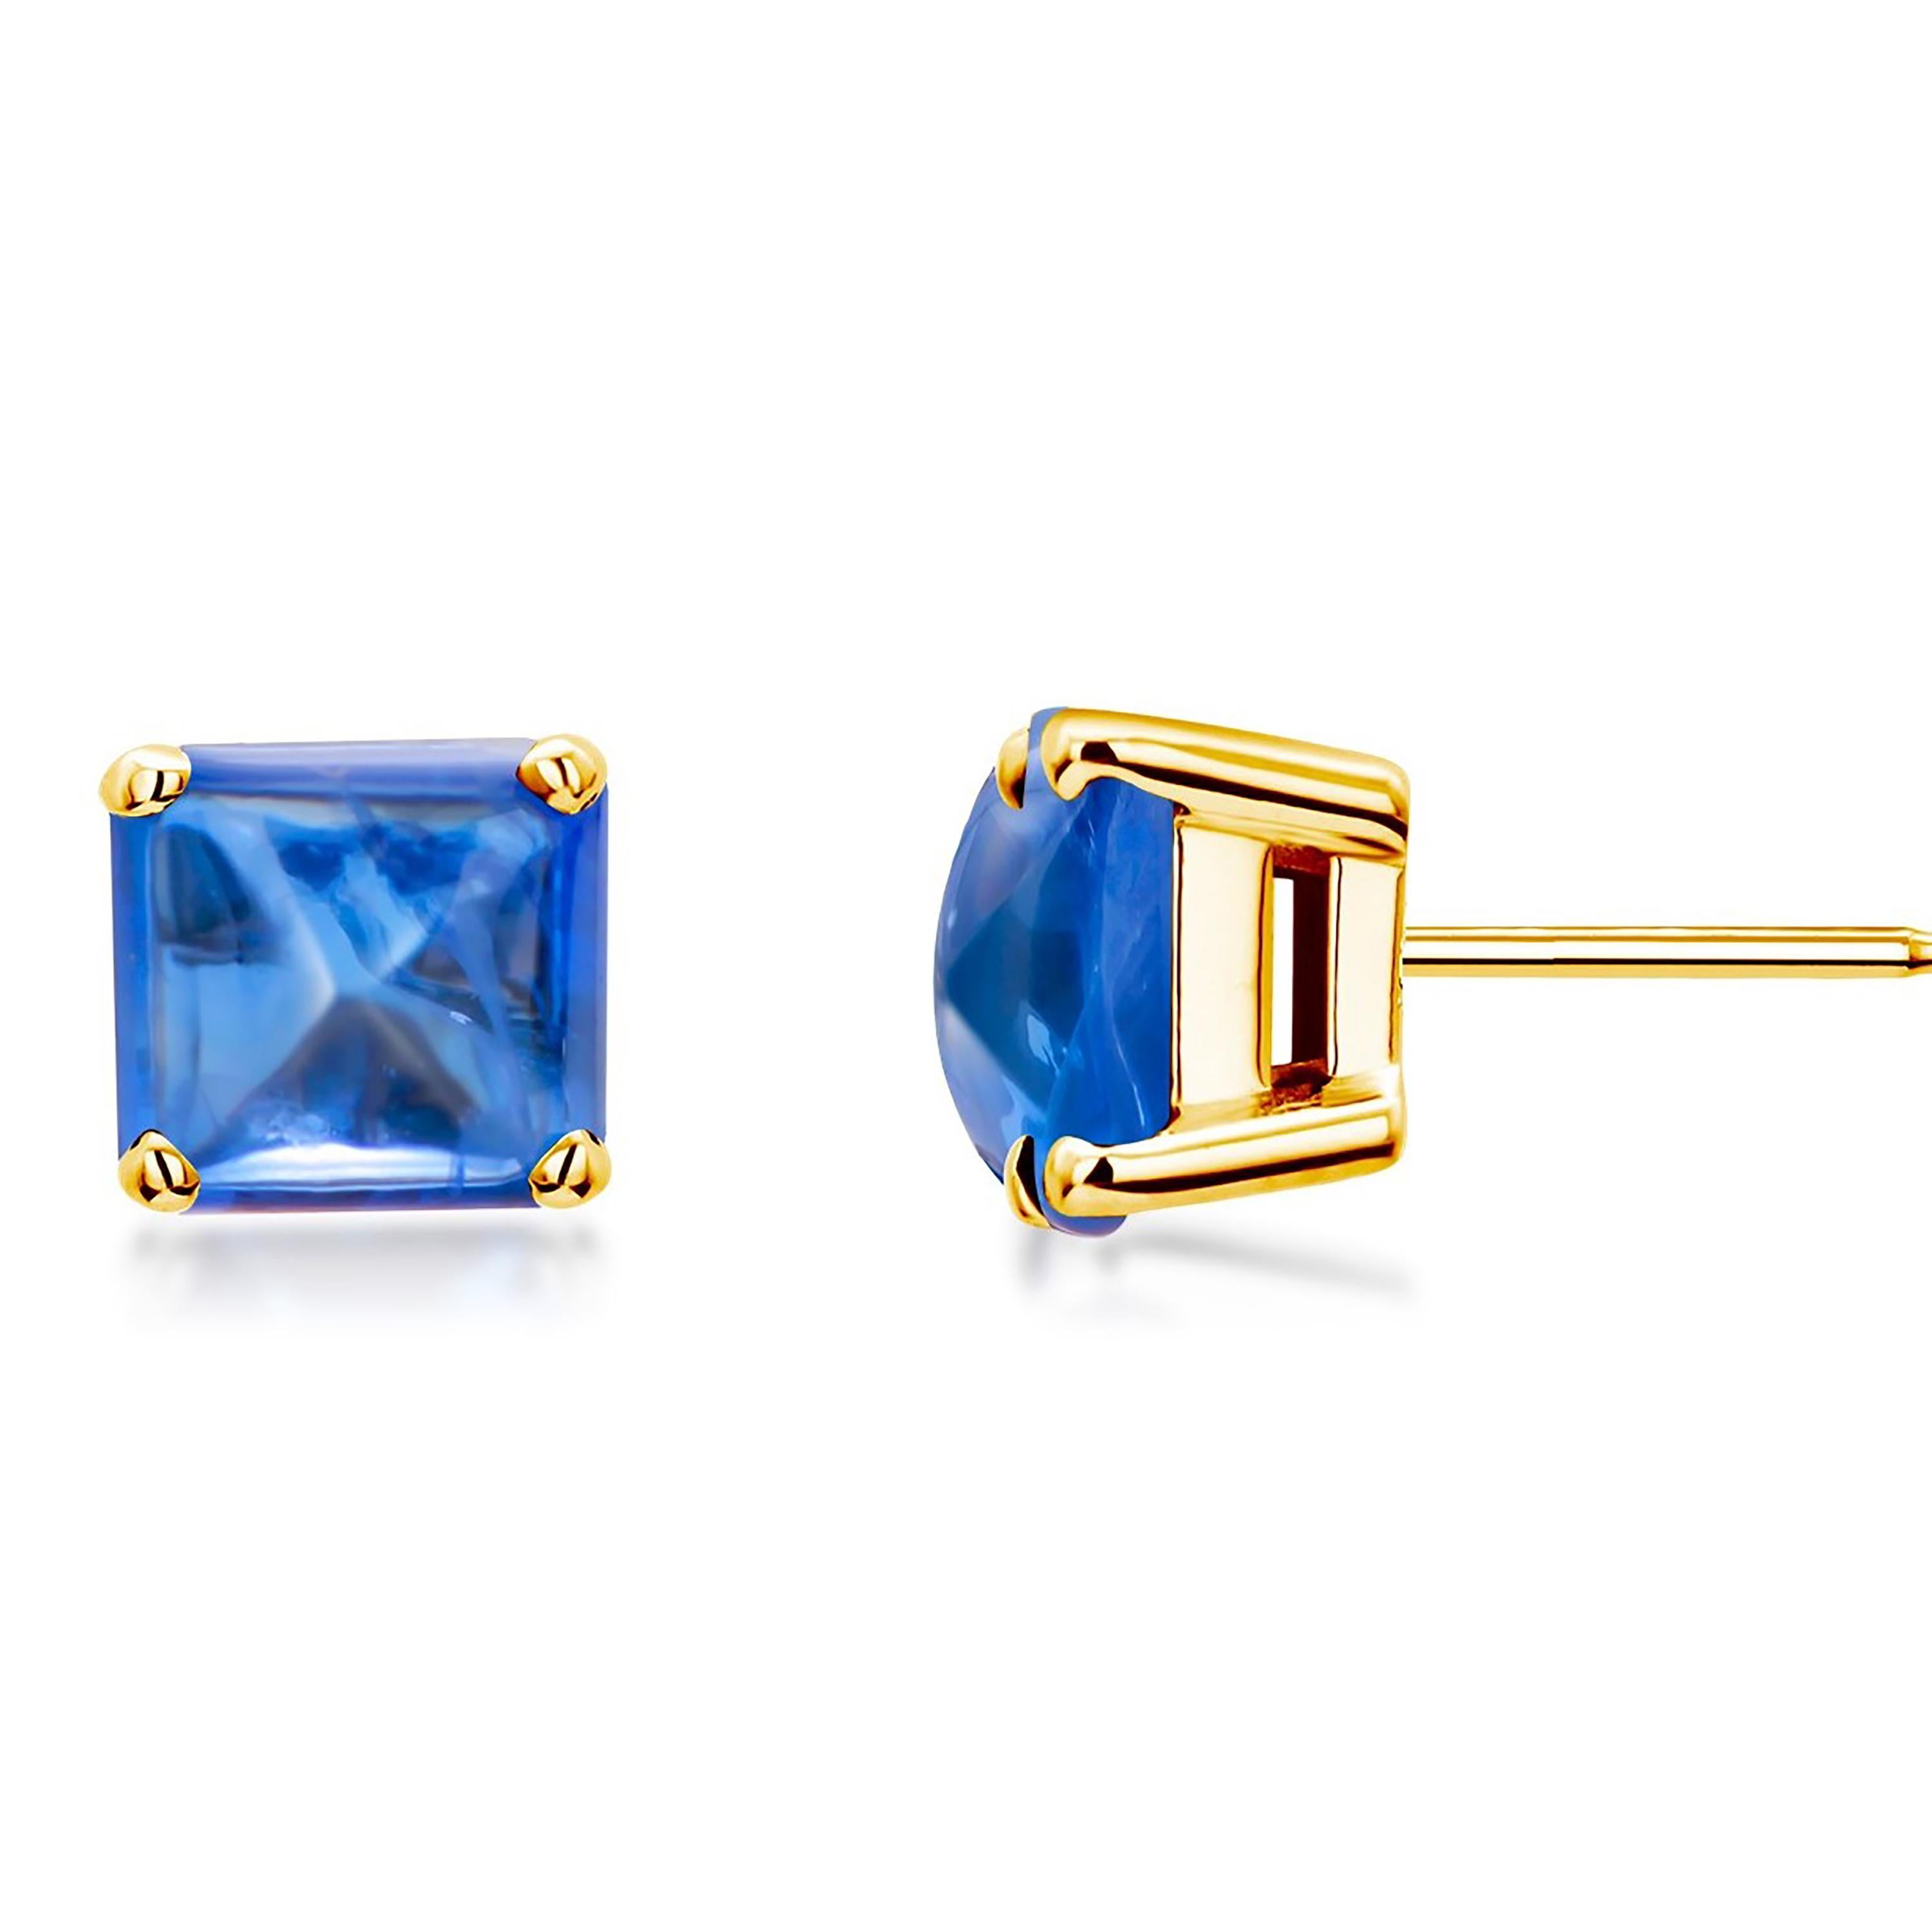 Contemporary Square Shaped Sugarloaf Ceylon Cabochon Sapphire 1.20 Carat Gold Stud Earrings For Sale